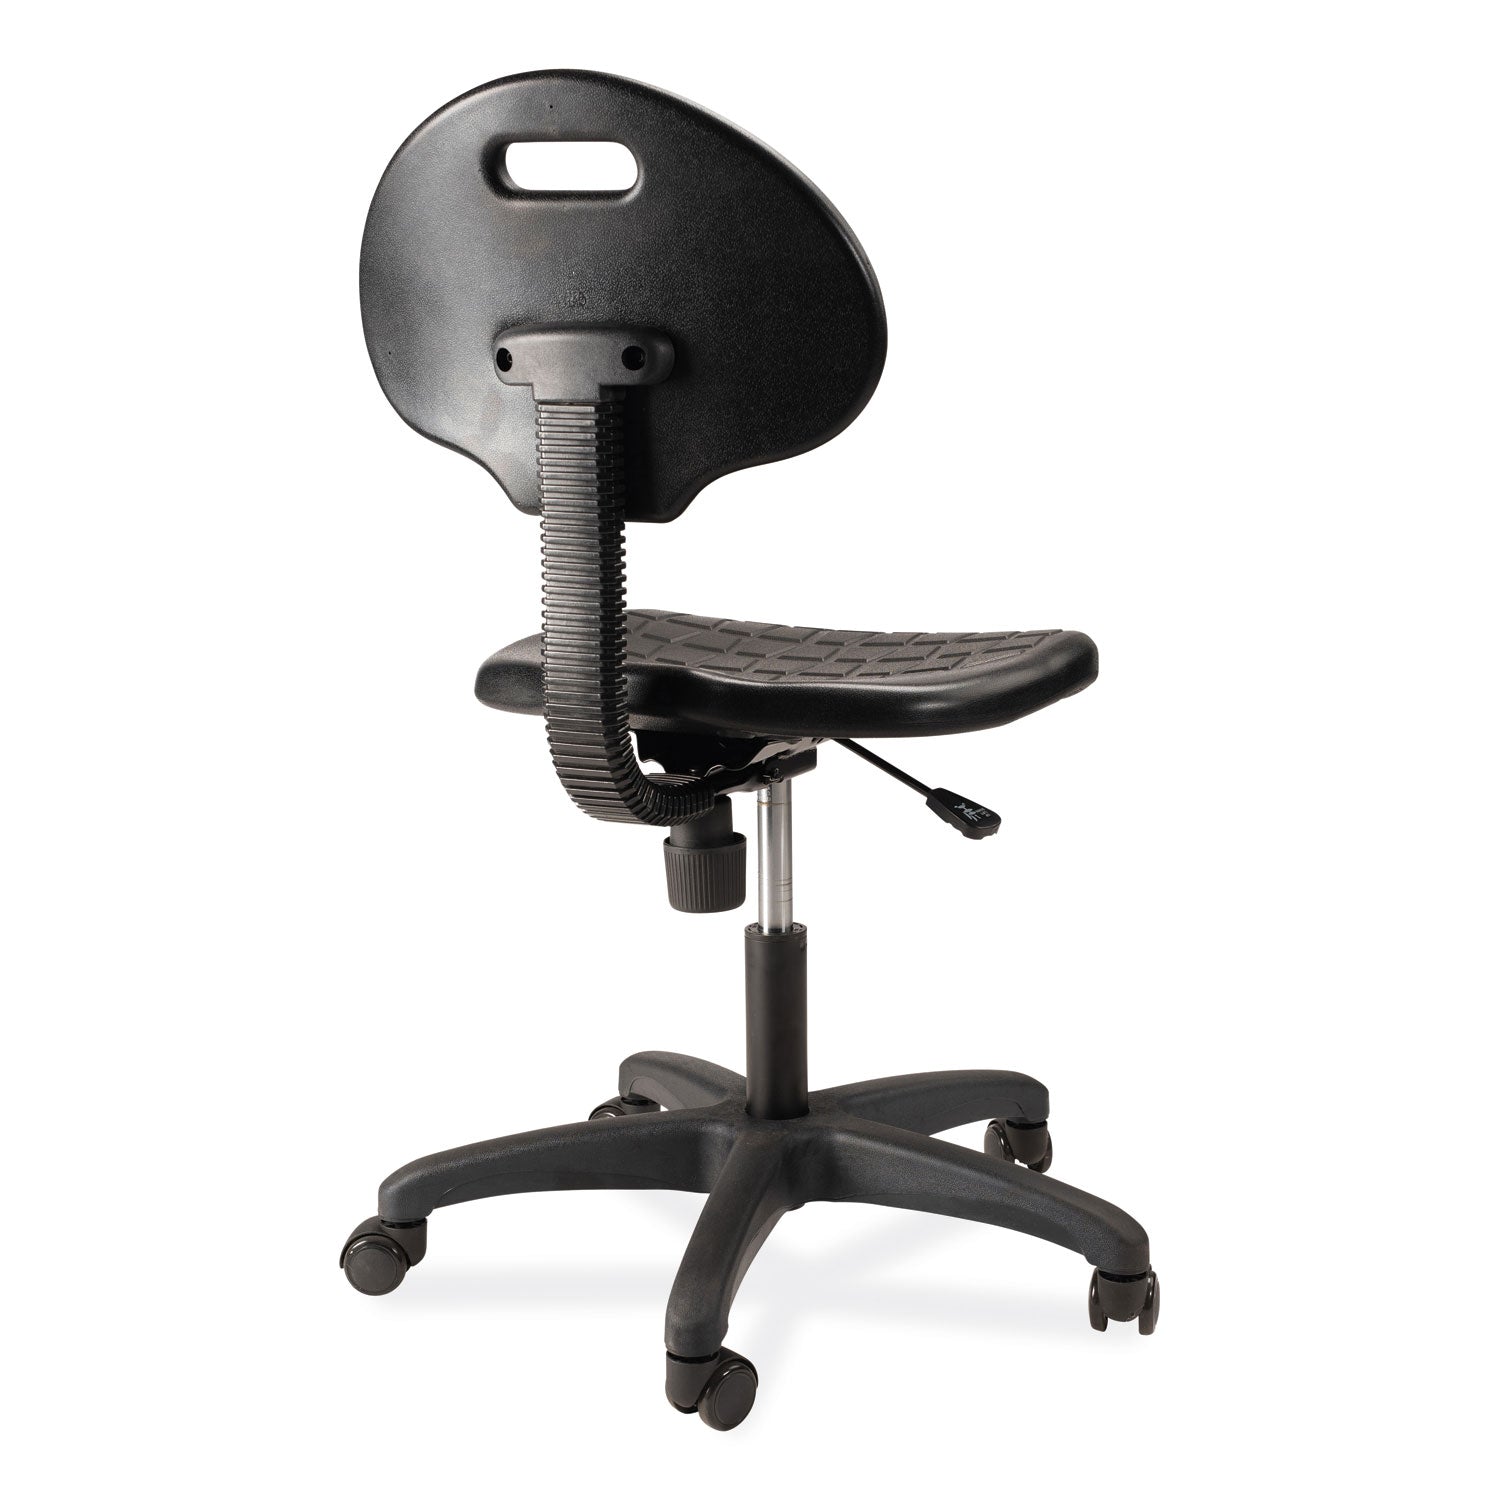 6700-series-polyurethane-adj-height-task-chair-supports-300-lb-16-21-seat-ht-black-seat-back-base-ships-in-1-3-bus-days_nps6716hb - 3